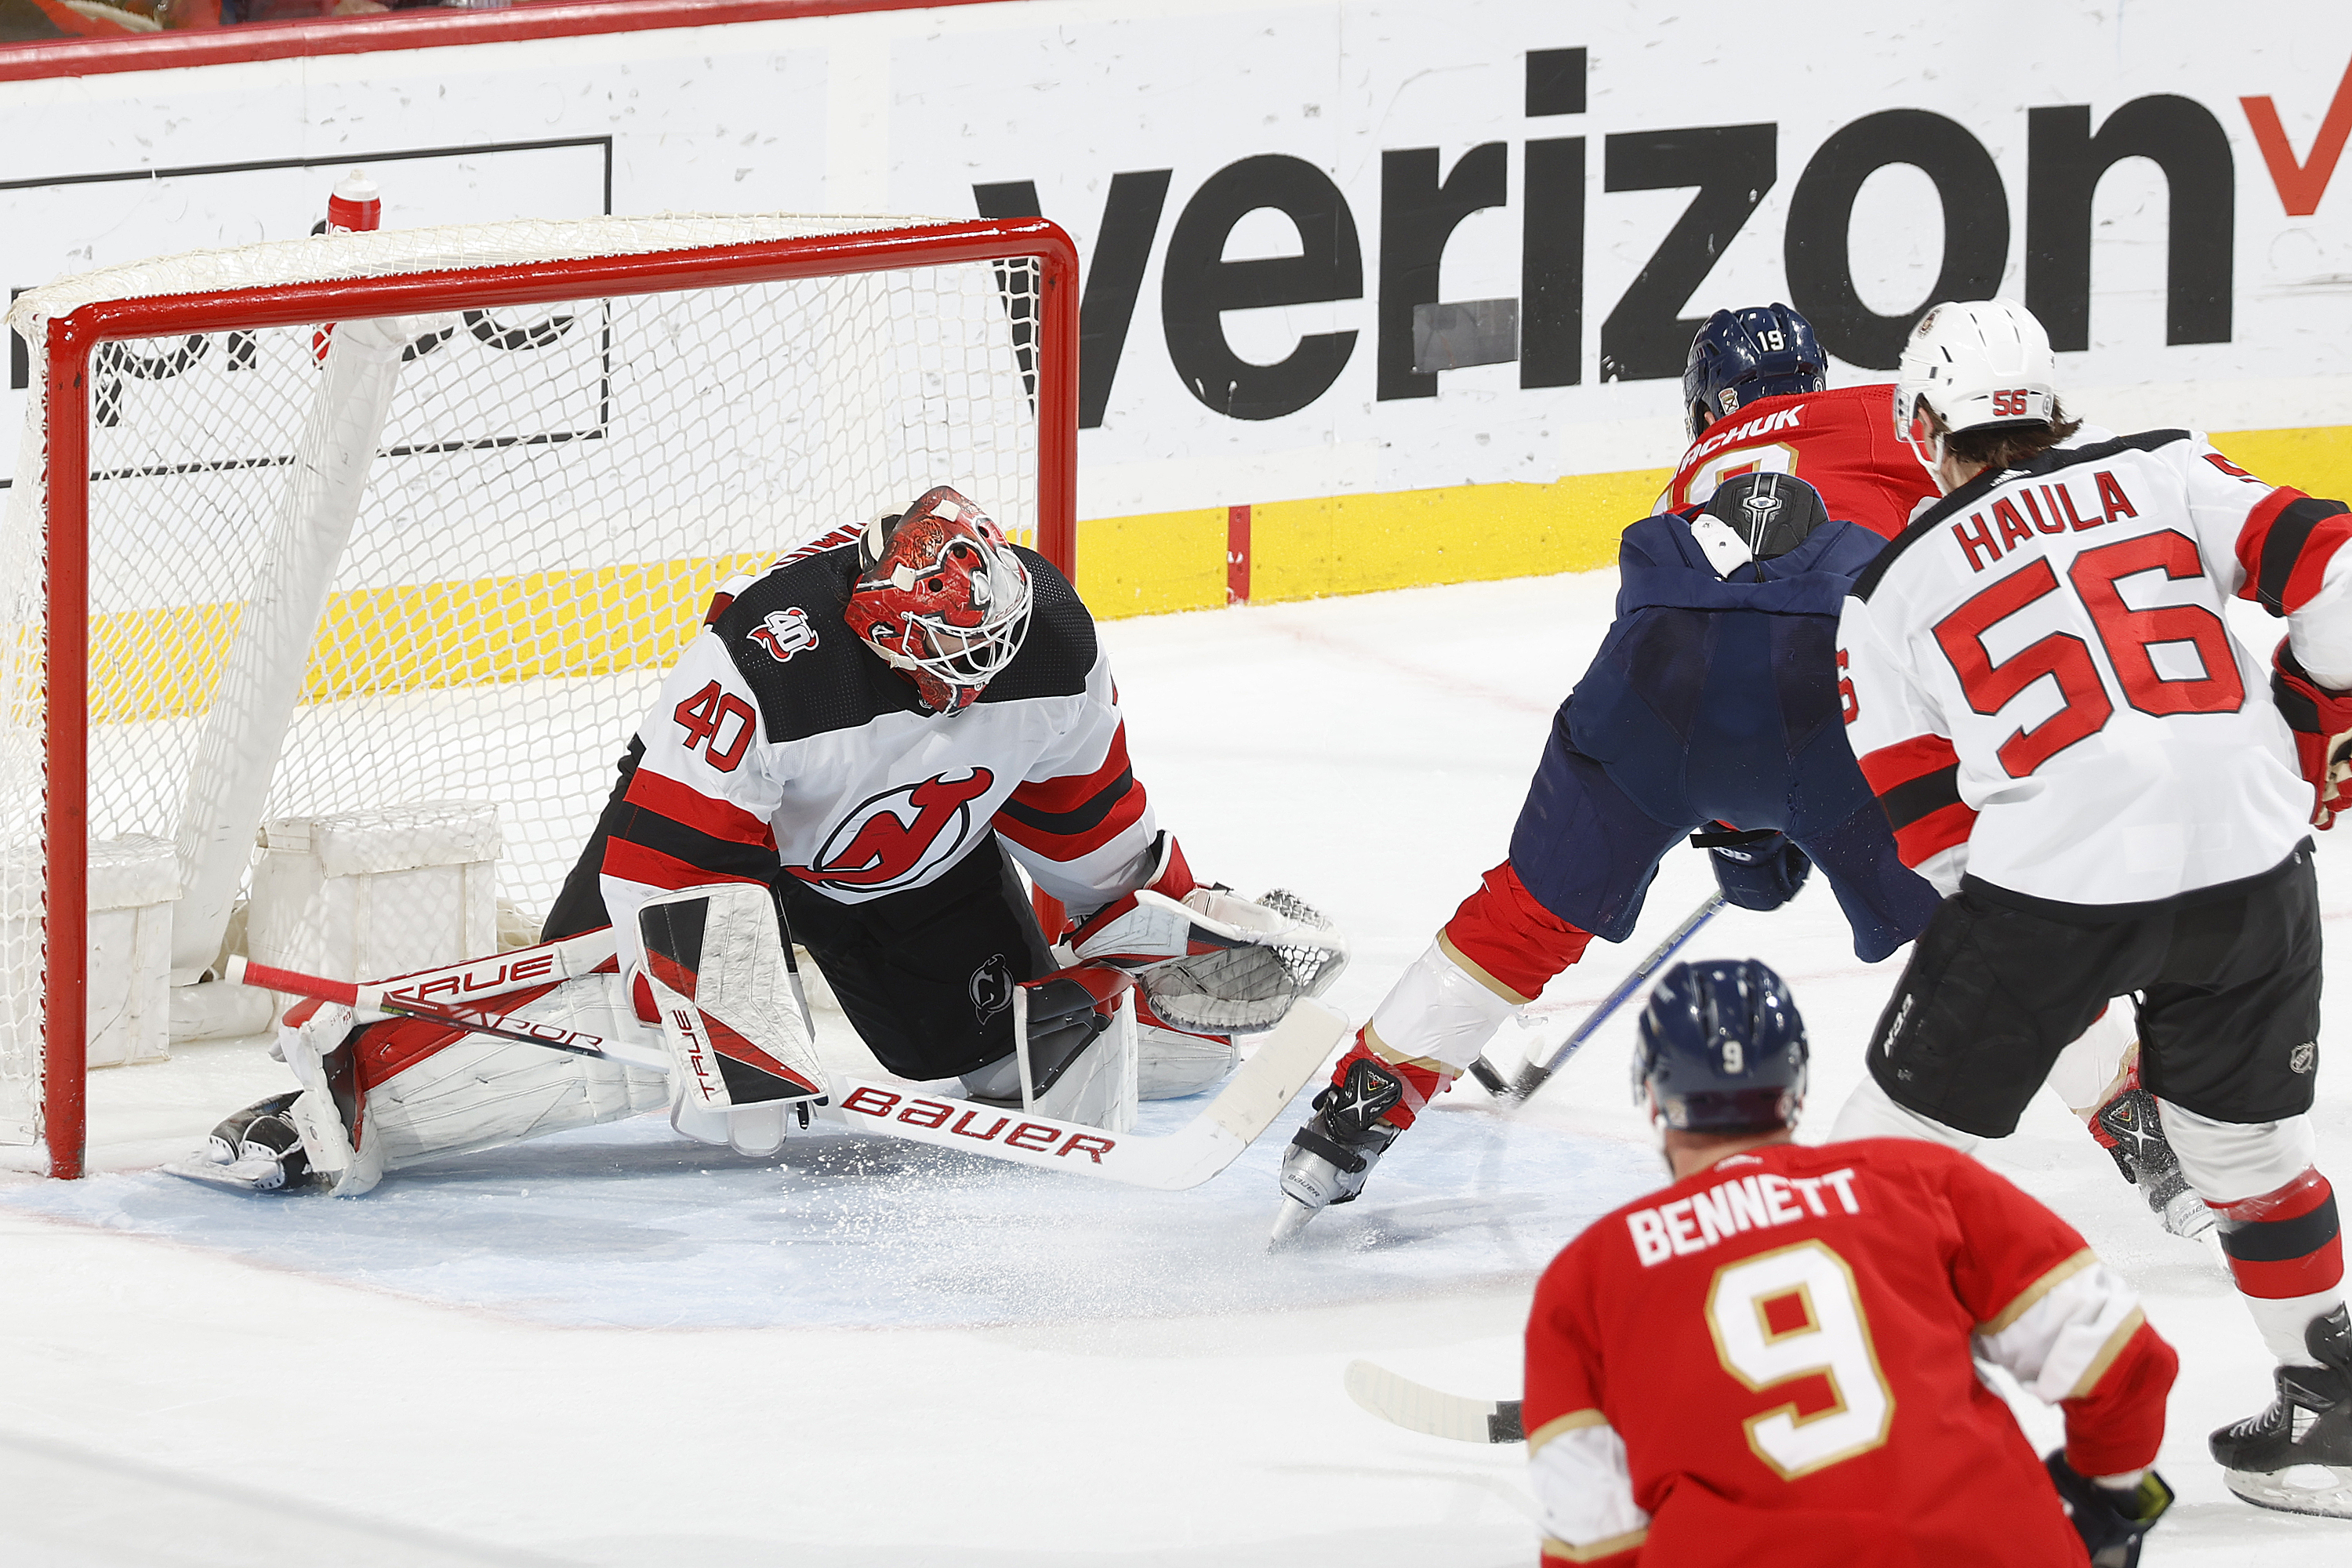 Devils extend winning streak to 6 games with overtime victory over